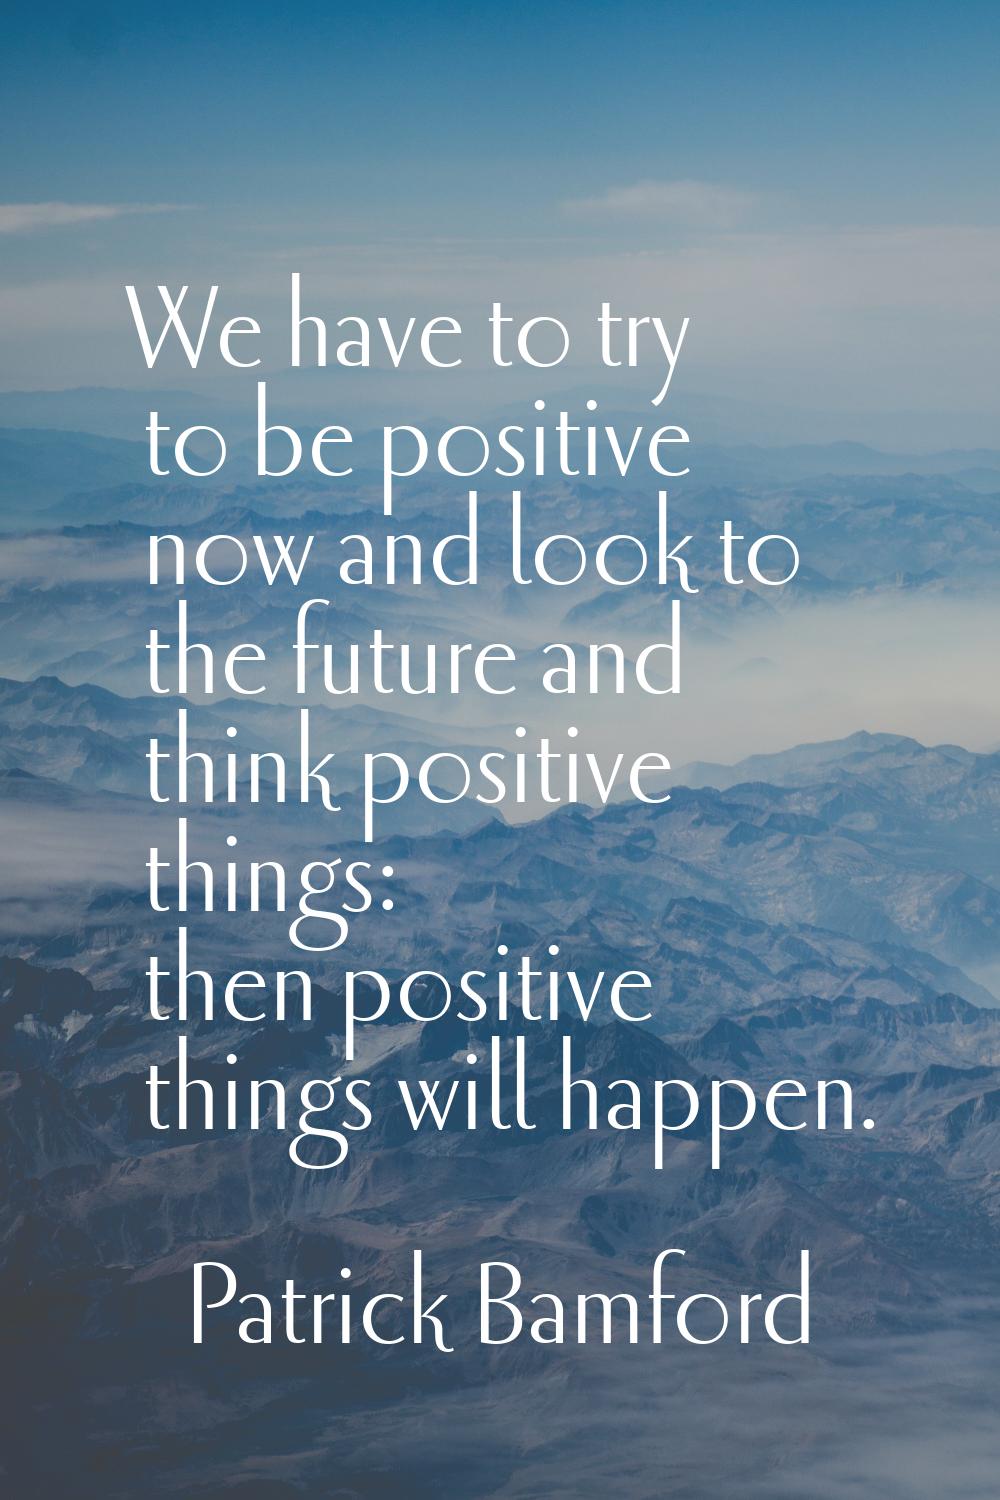 We have to try to be positive now and look to the future and think positive things: then positive t